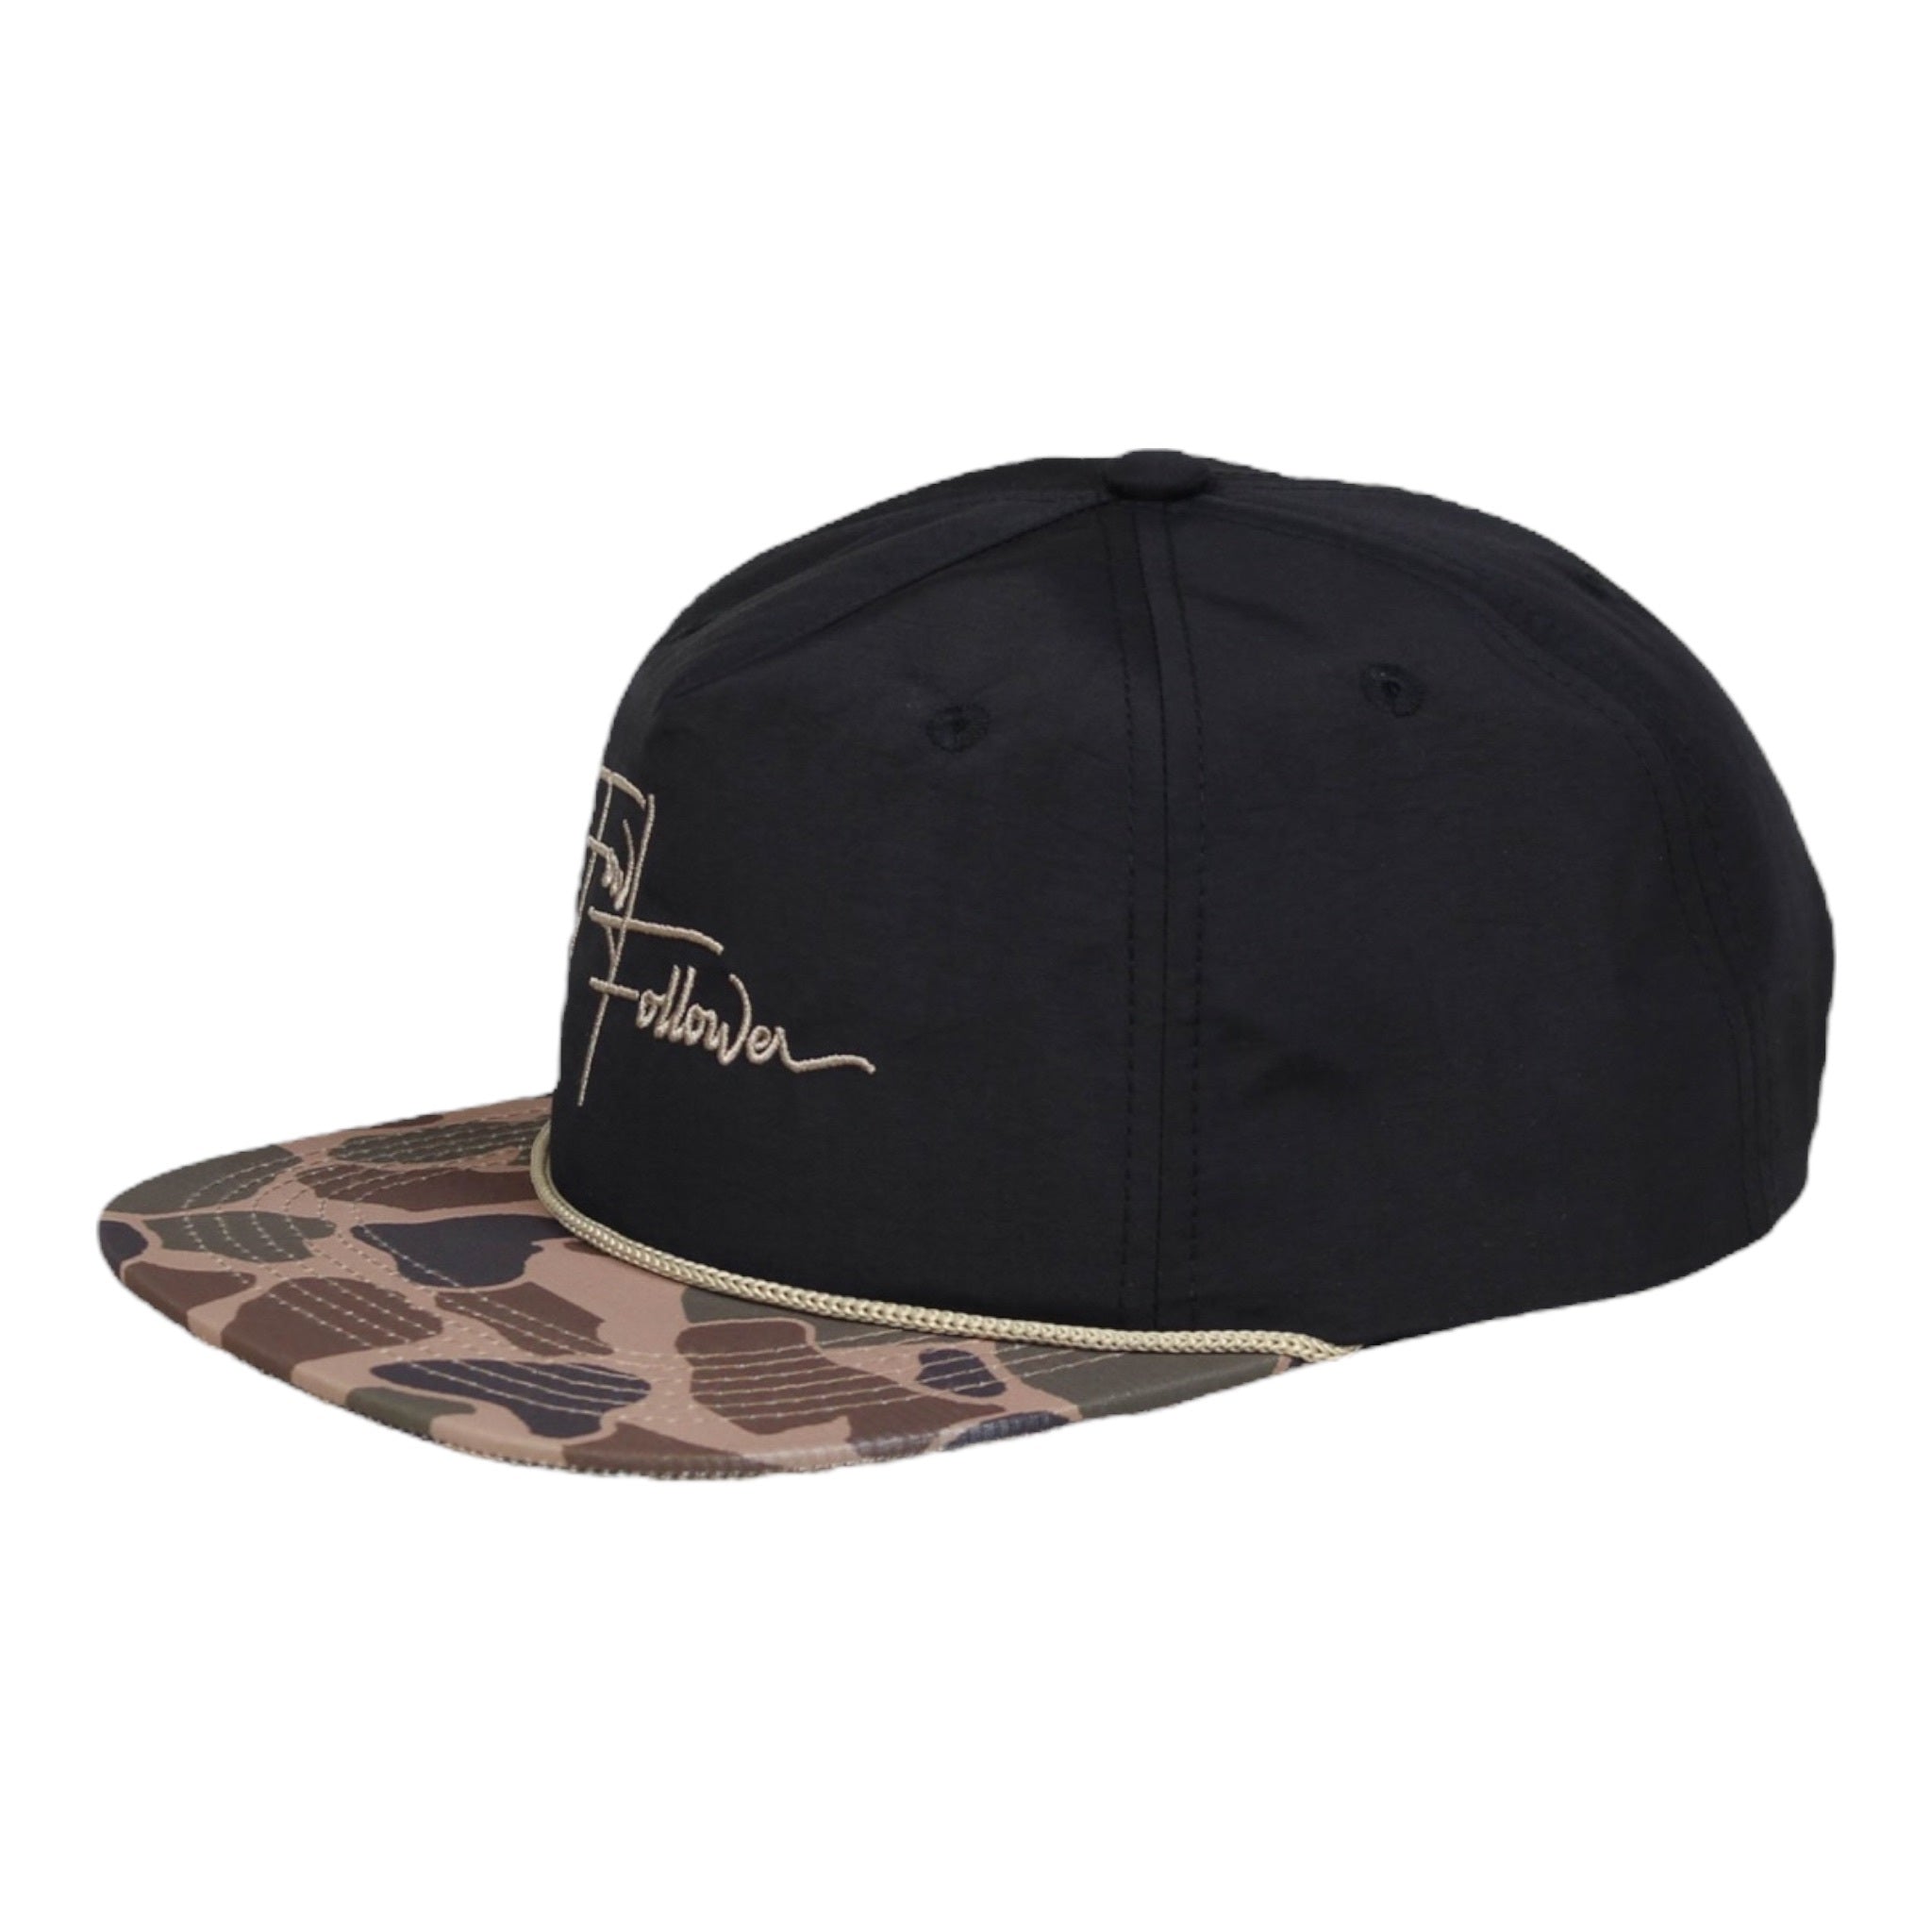 A Fowl Follower Black Camo Rope Hat with a white logo on it.